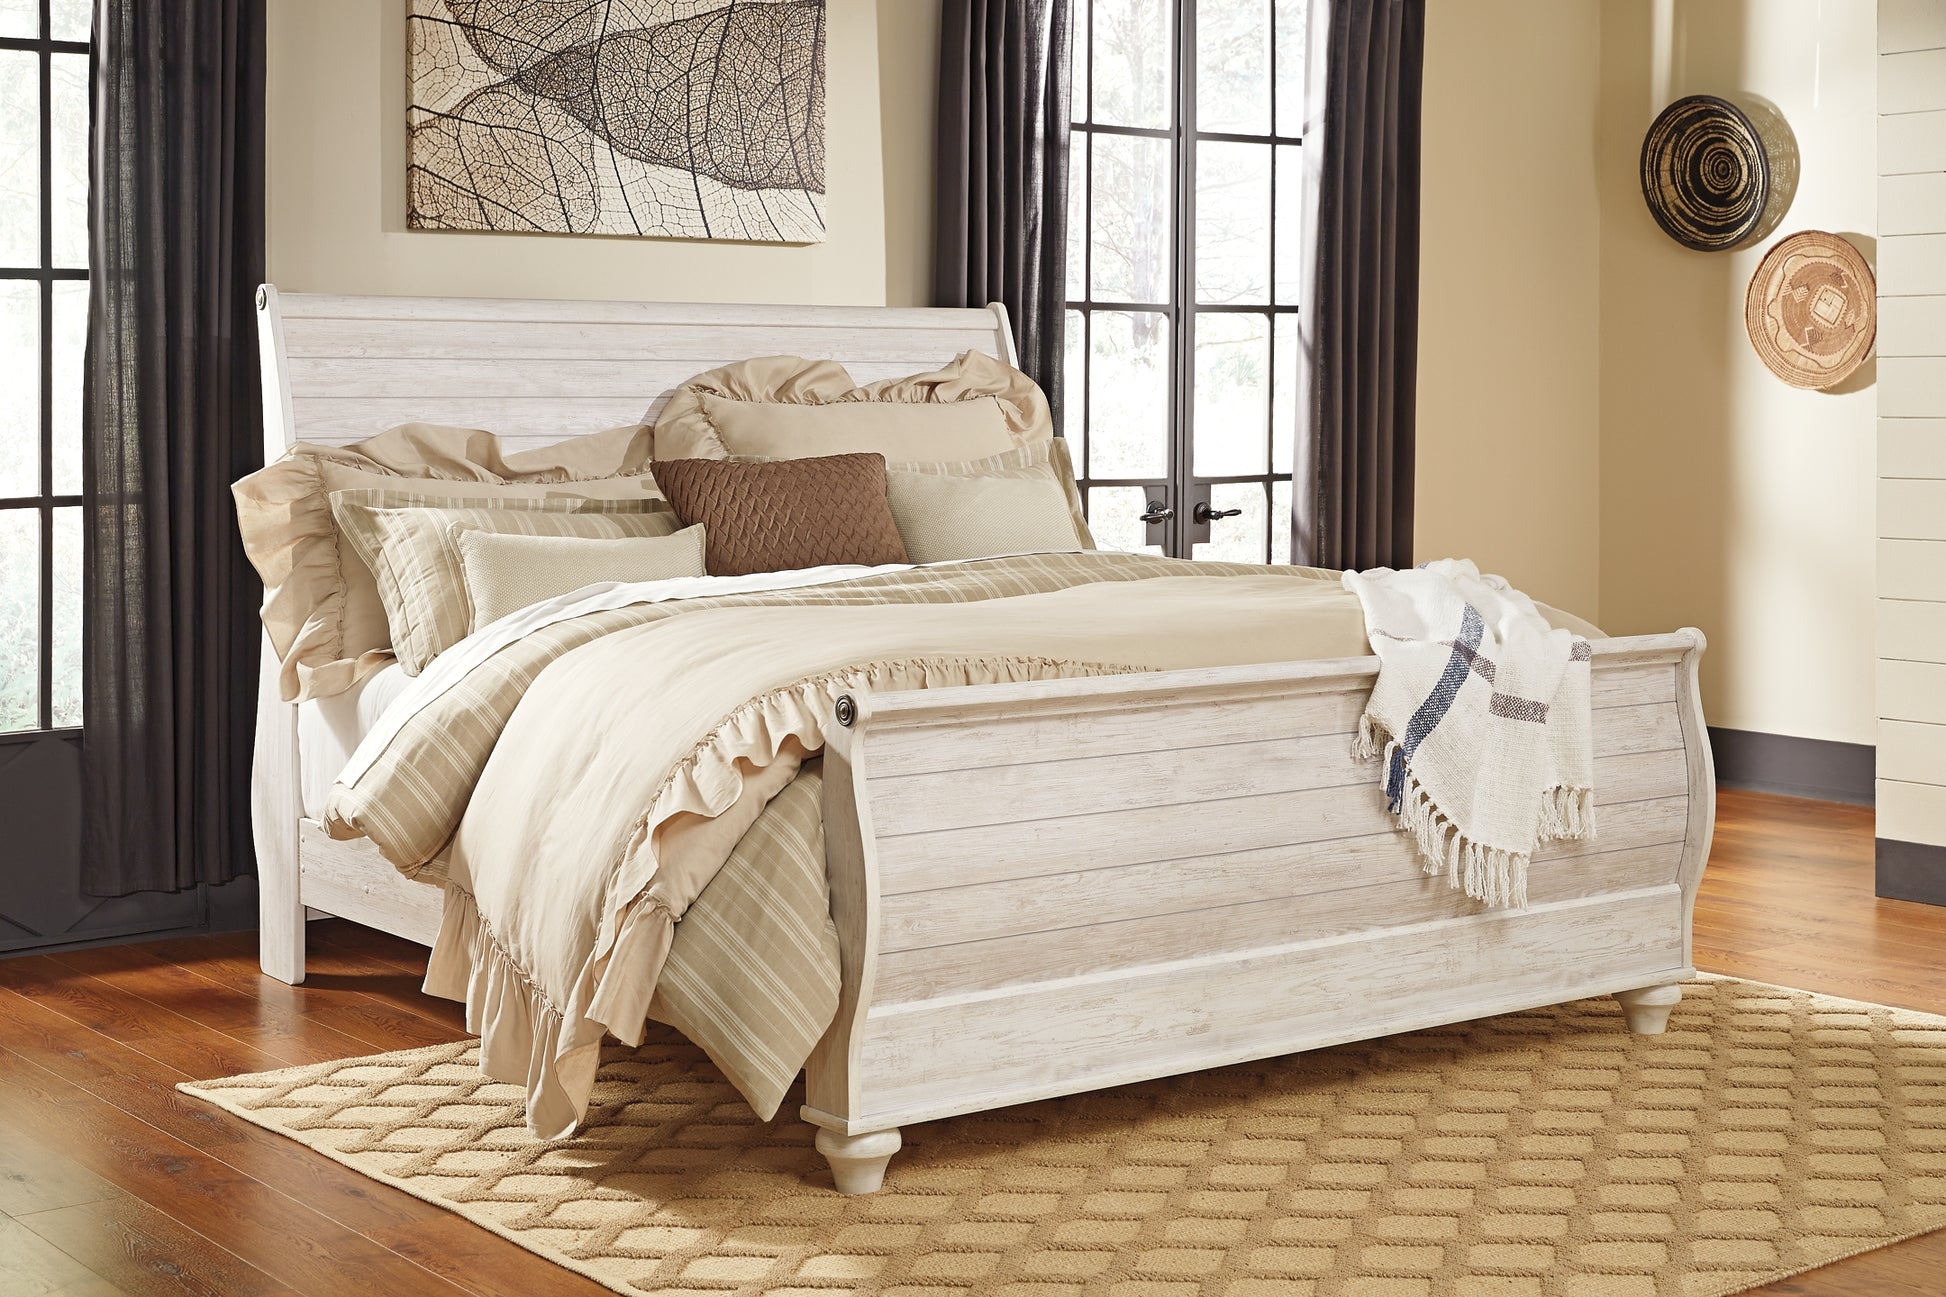 Willowton Queen Sleigh Bed JB's Furniture  Home Furniture, Home Decor, Furniture Store